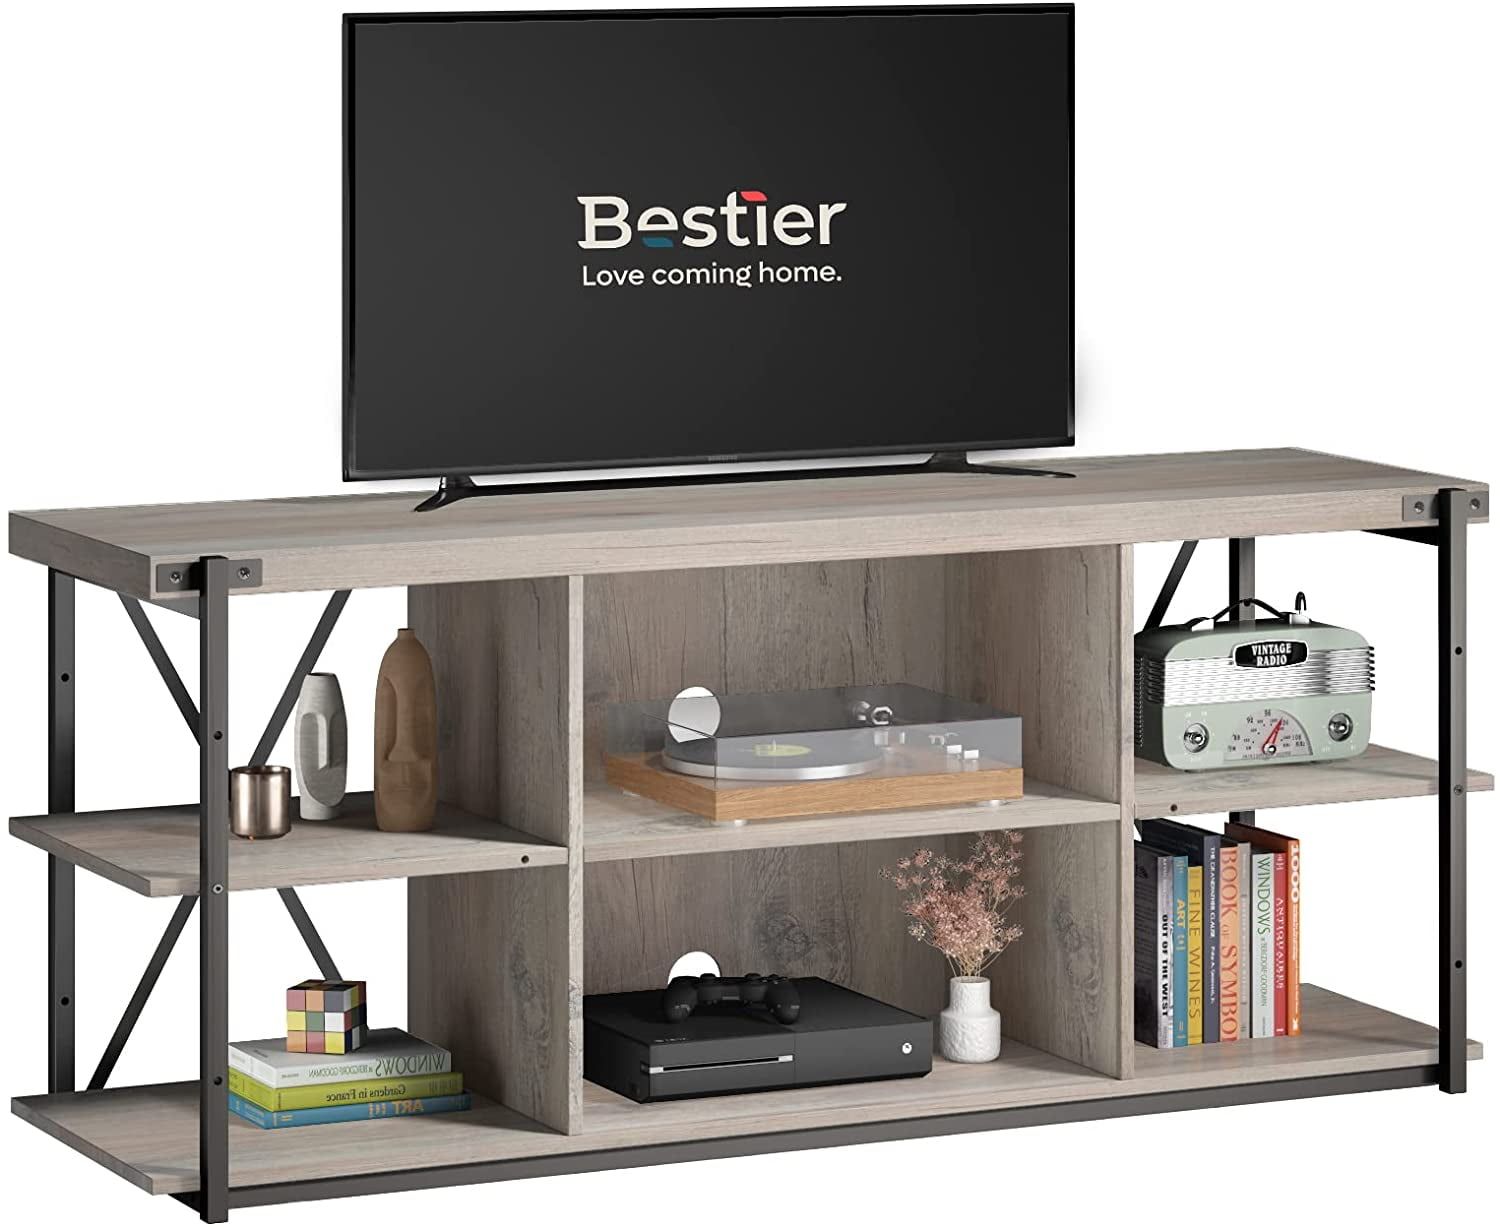 Bestier Farmhouse Tv Stand With Storage Shelves For Tvs Up To 65", Wash With Bestier Tv Stand For Tvs Up To 75" (View 4 of 20)